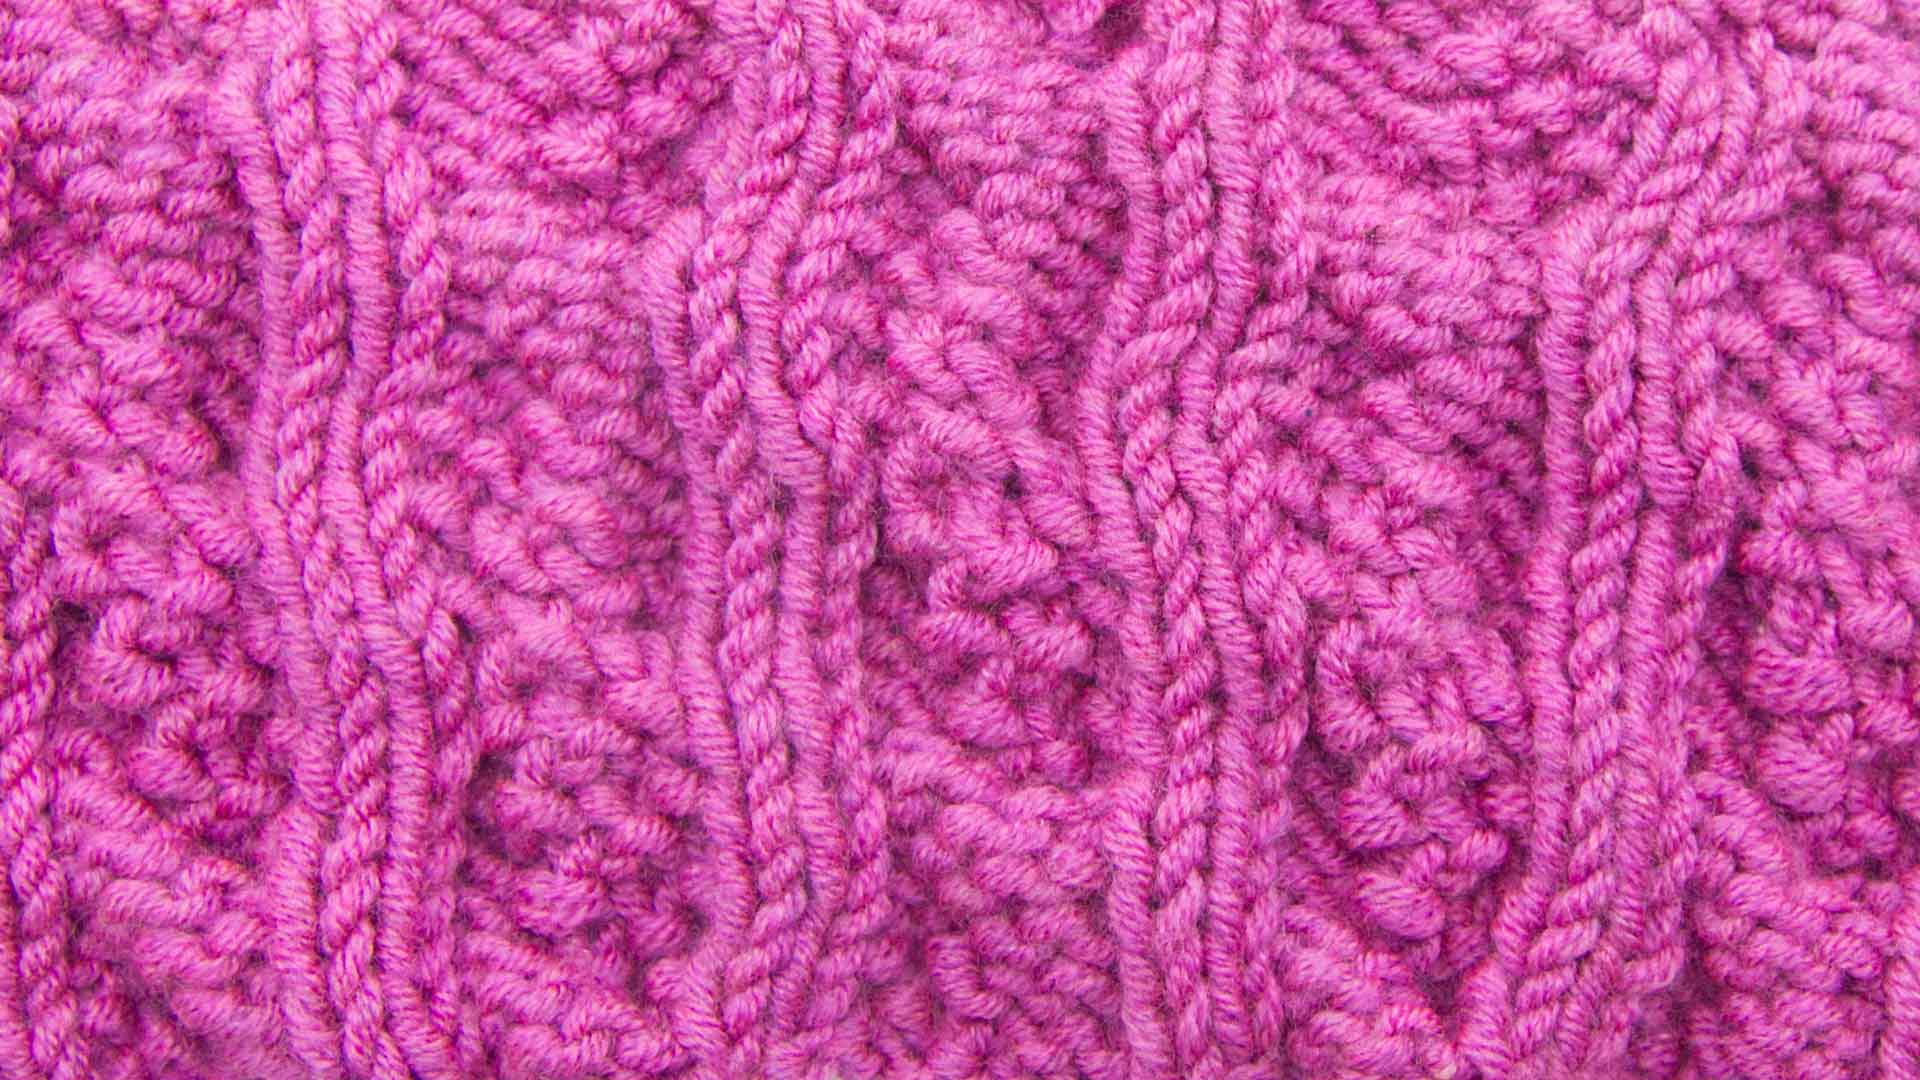 Textured Cable Stitch - Knitting Stitch Dictionary